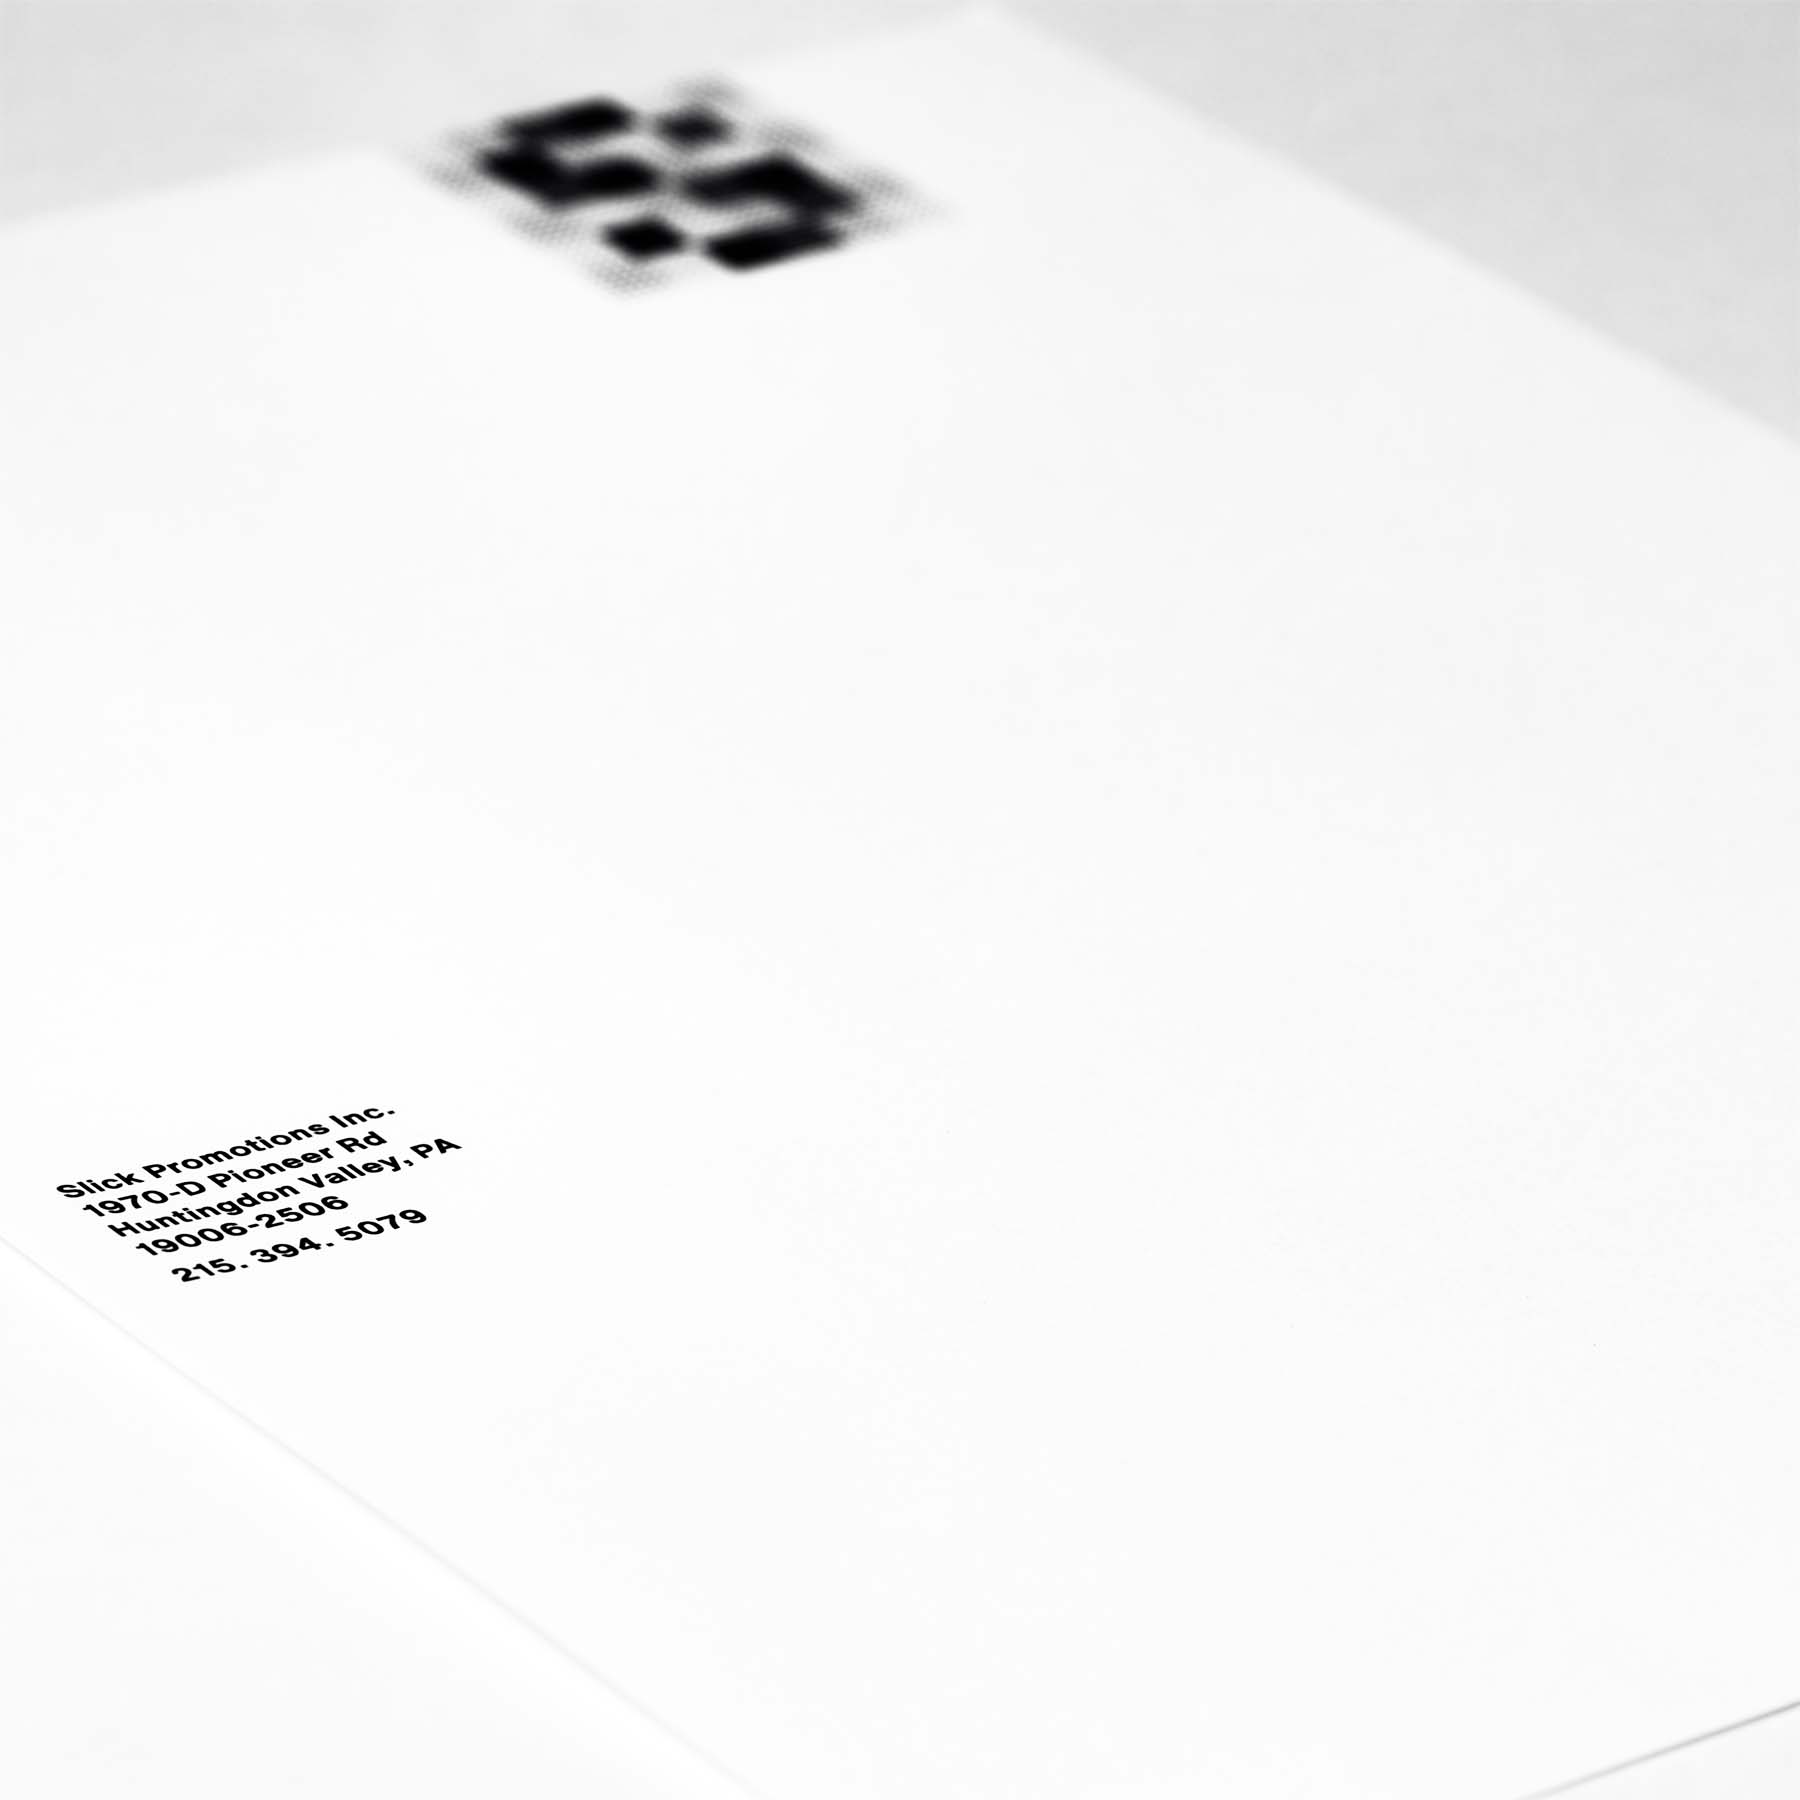 Slick Promotions letterhead with address in focus and logo in background.